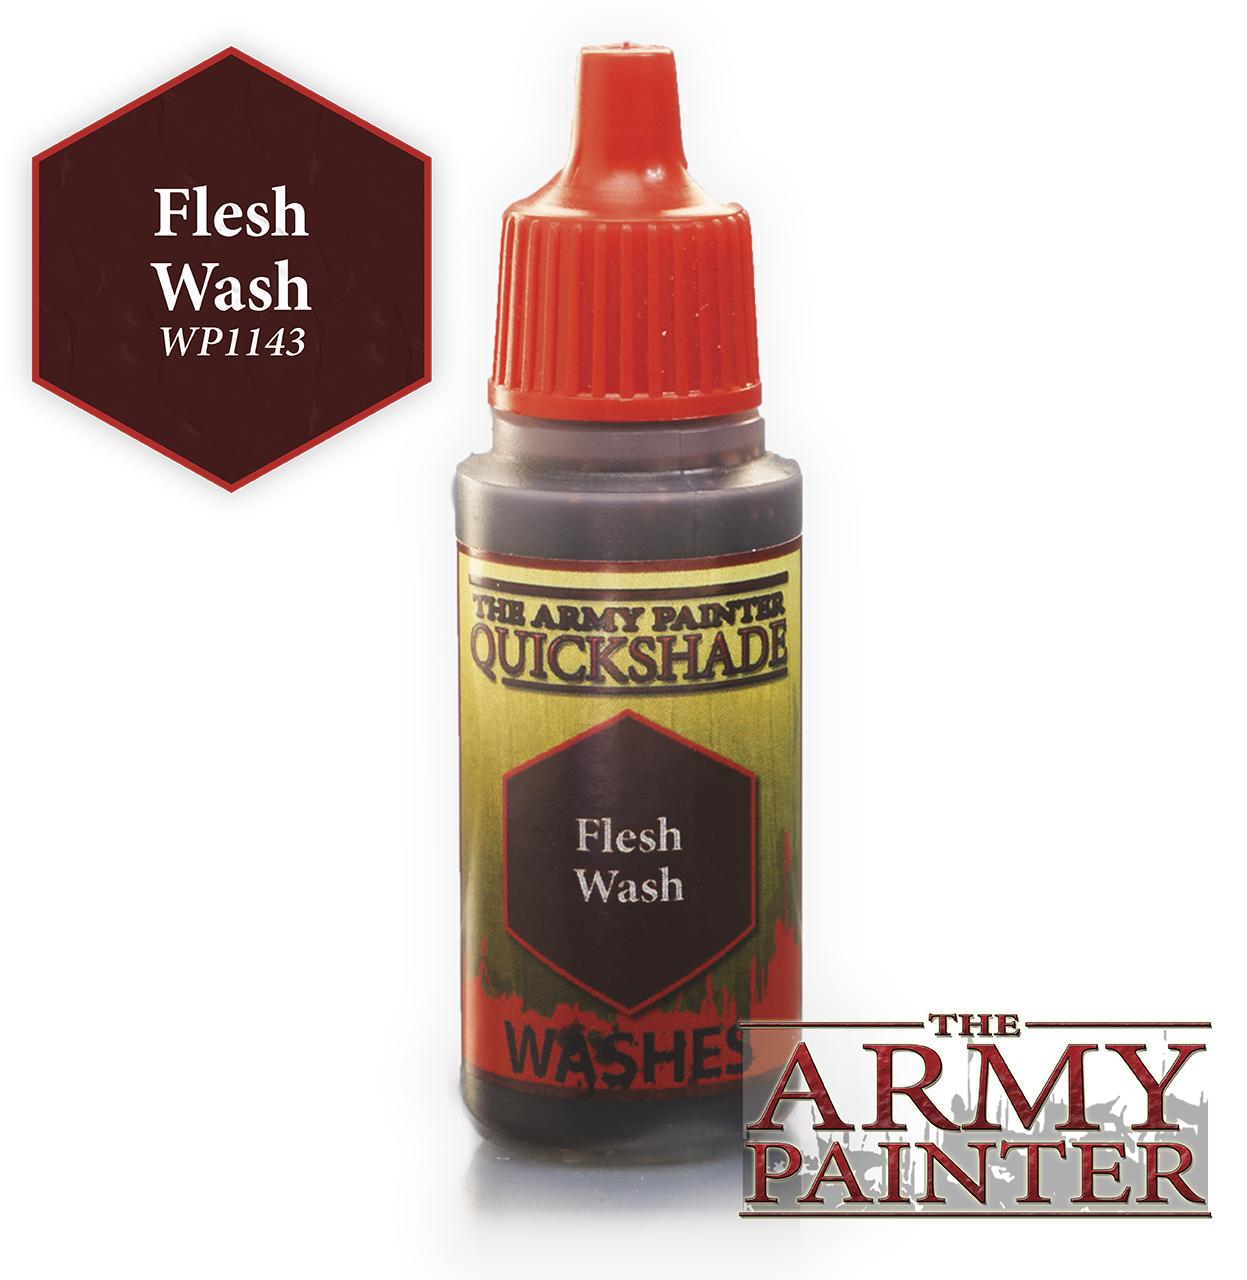 The ARMY PAINTER: Washes Warpaints - Flesh Wash | Tacoma Games